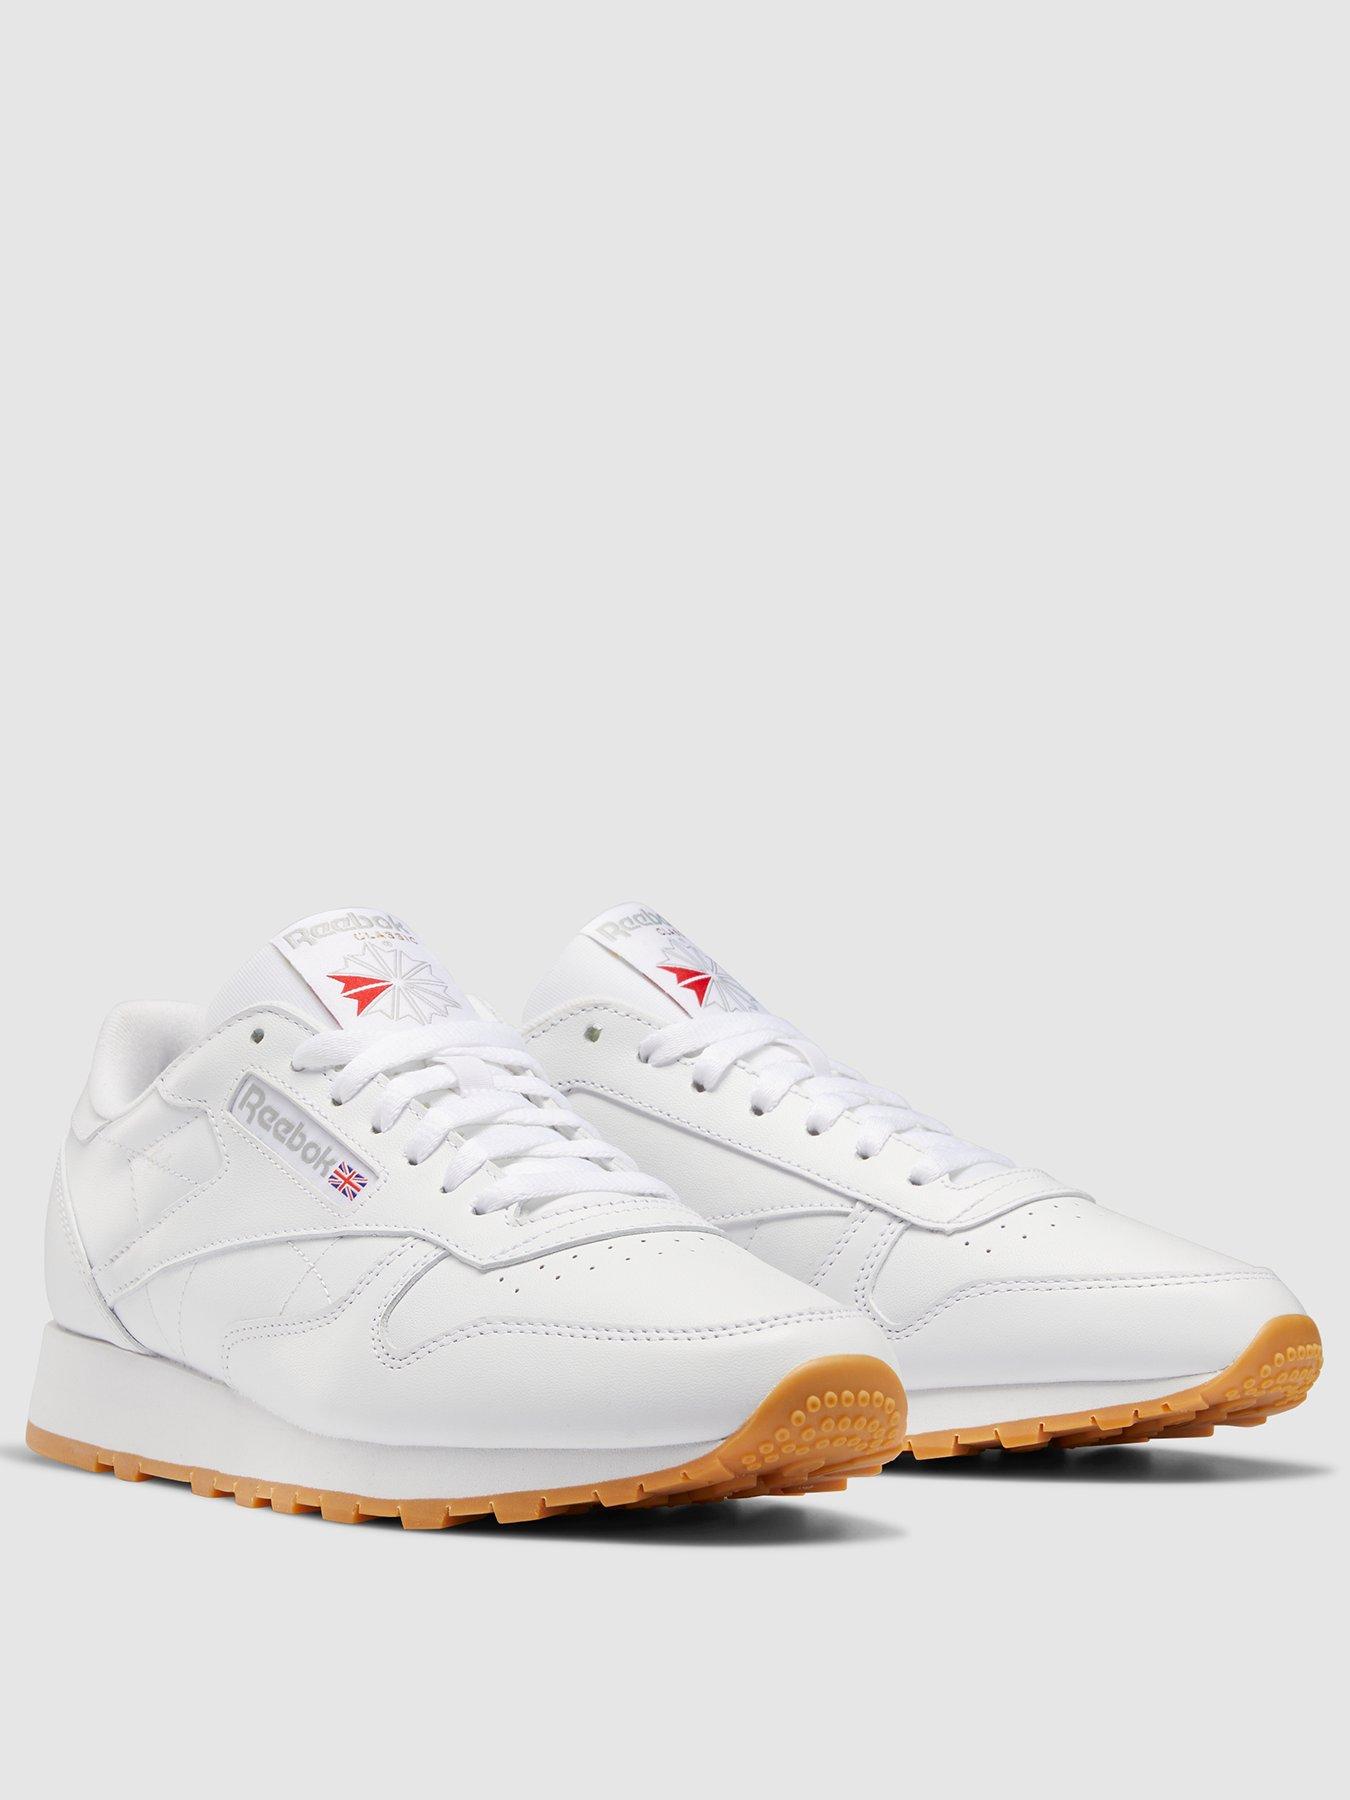 Slagter Manifest Ambient Reebok Classic | Trainers | Men | www.very.co.uk